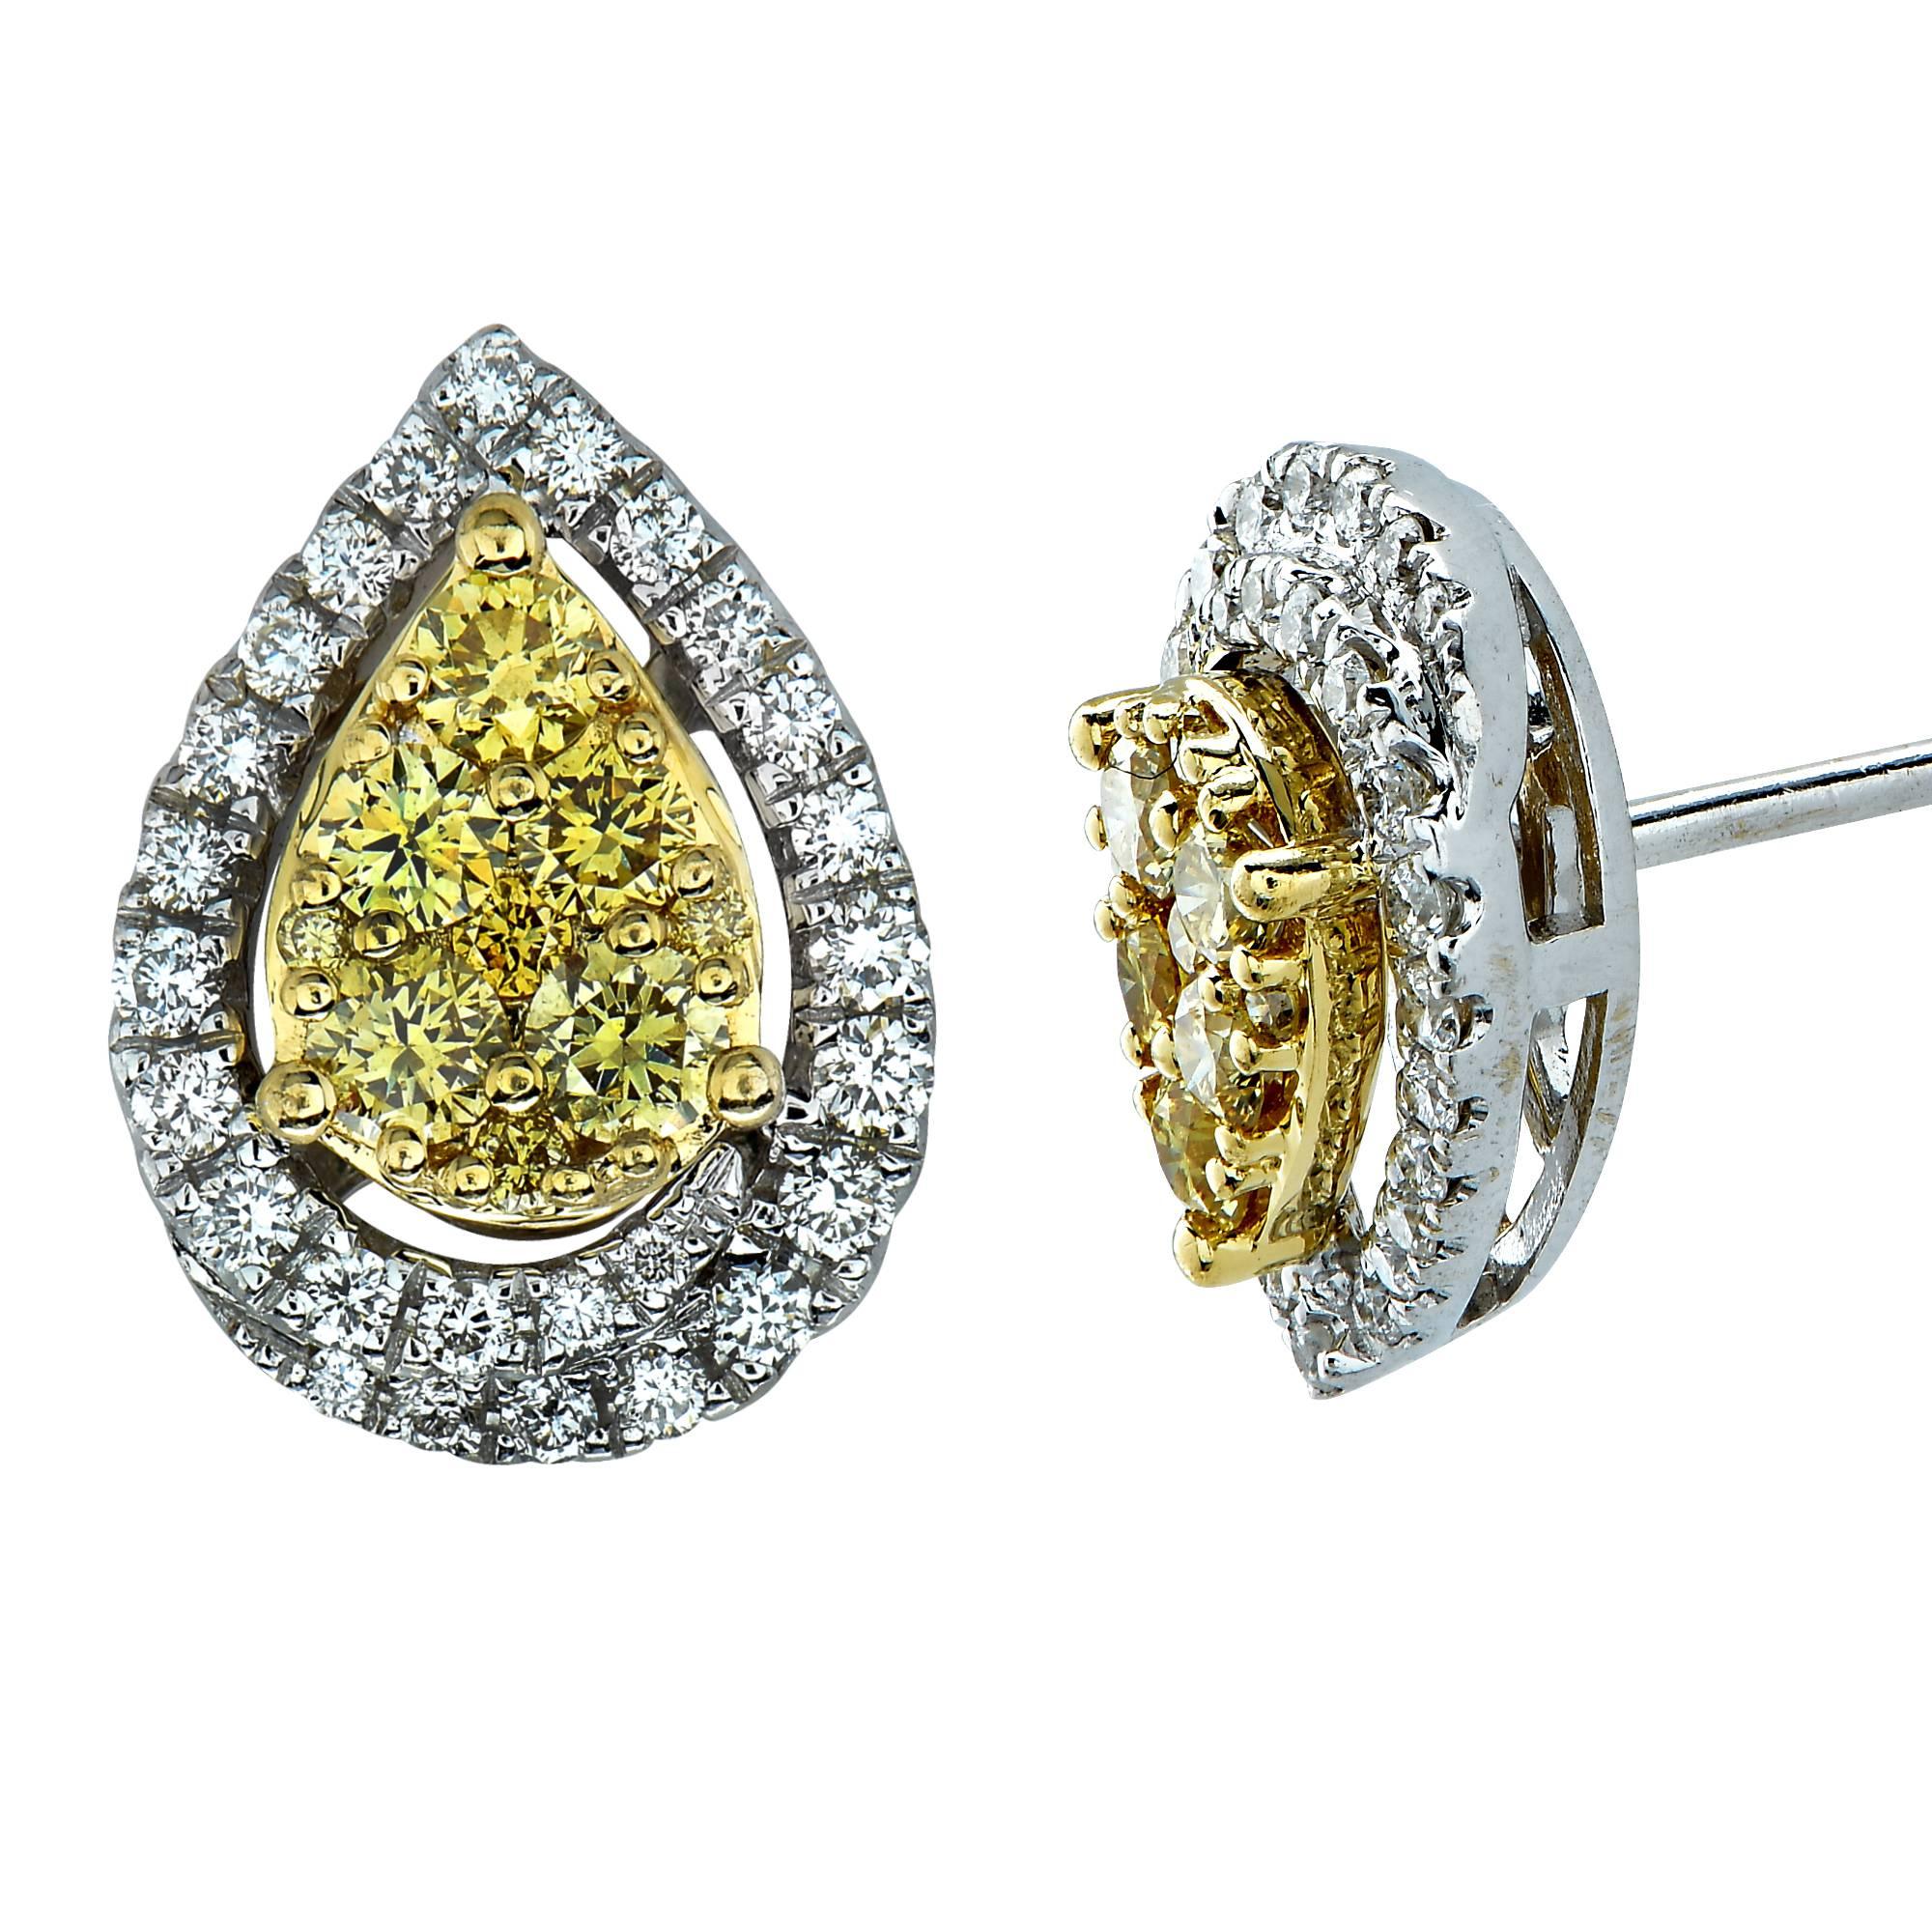 18k white and yellow gold pear shape earrings featuring 70 round brilliant cut yellow and G color VS clarity diamonds weighing approximately 1ct total. These earrings measure 12.4mm x 9.2mm.

Our pieces are all accompanied by an appraisal performed